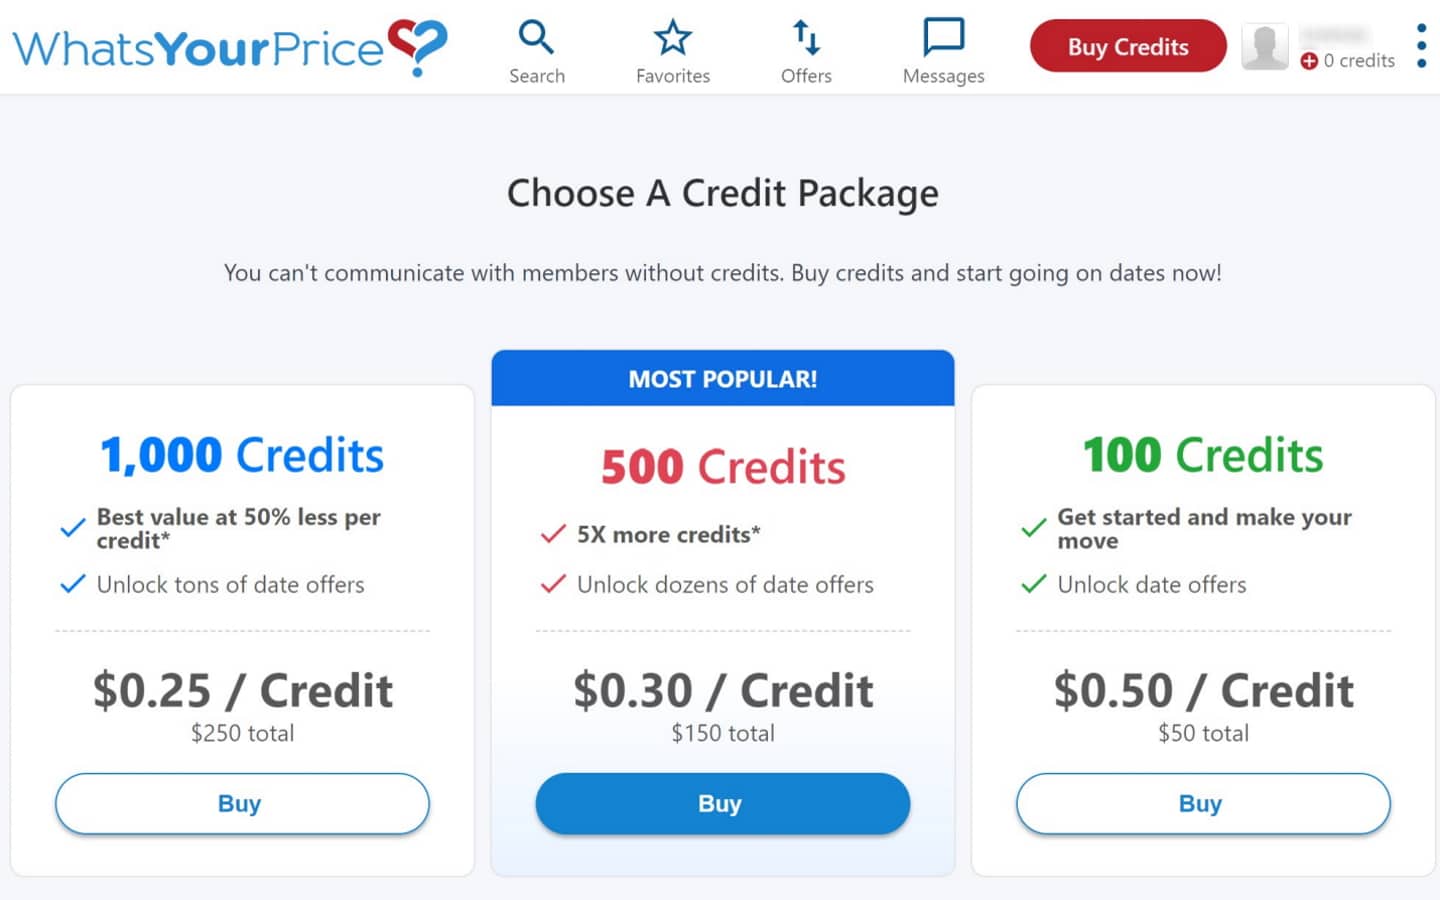 Review WhatsYourPrice.com payment